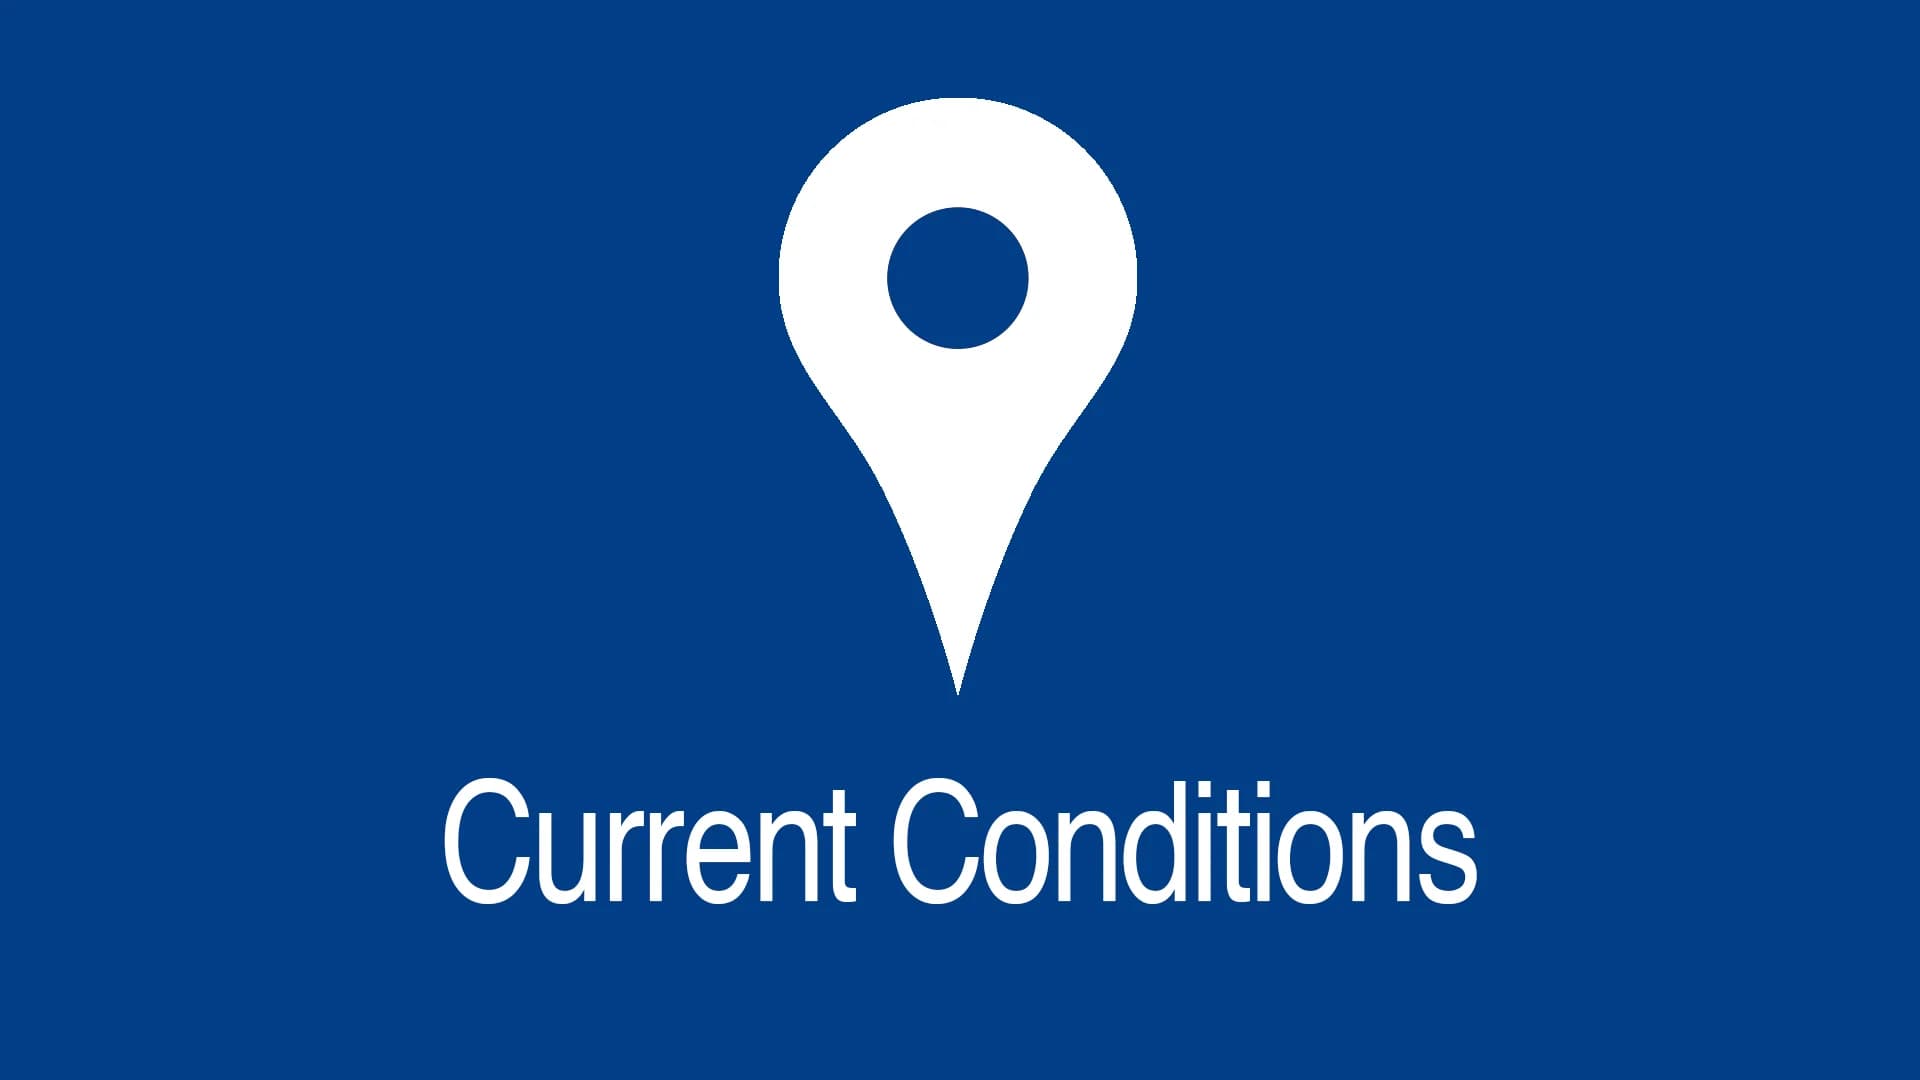 Current Conditions